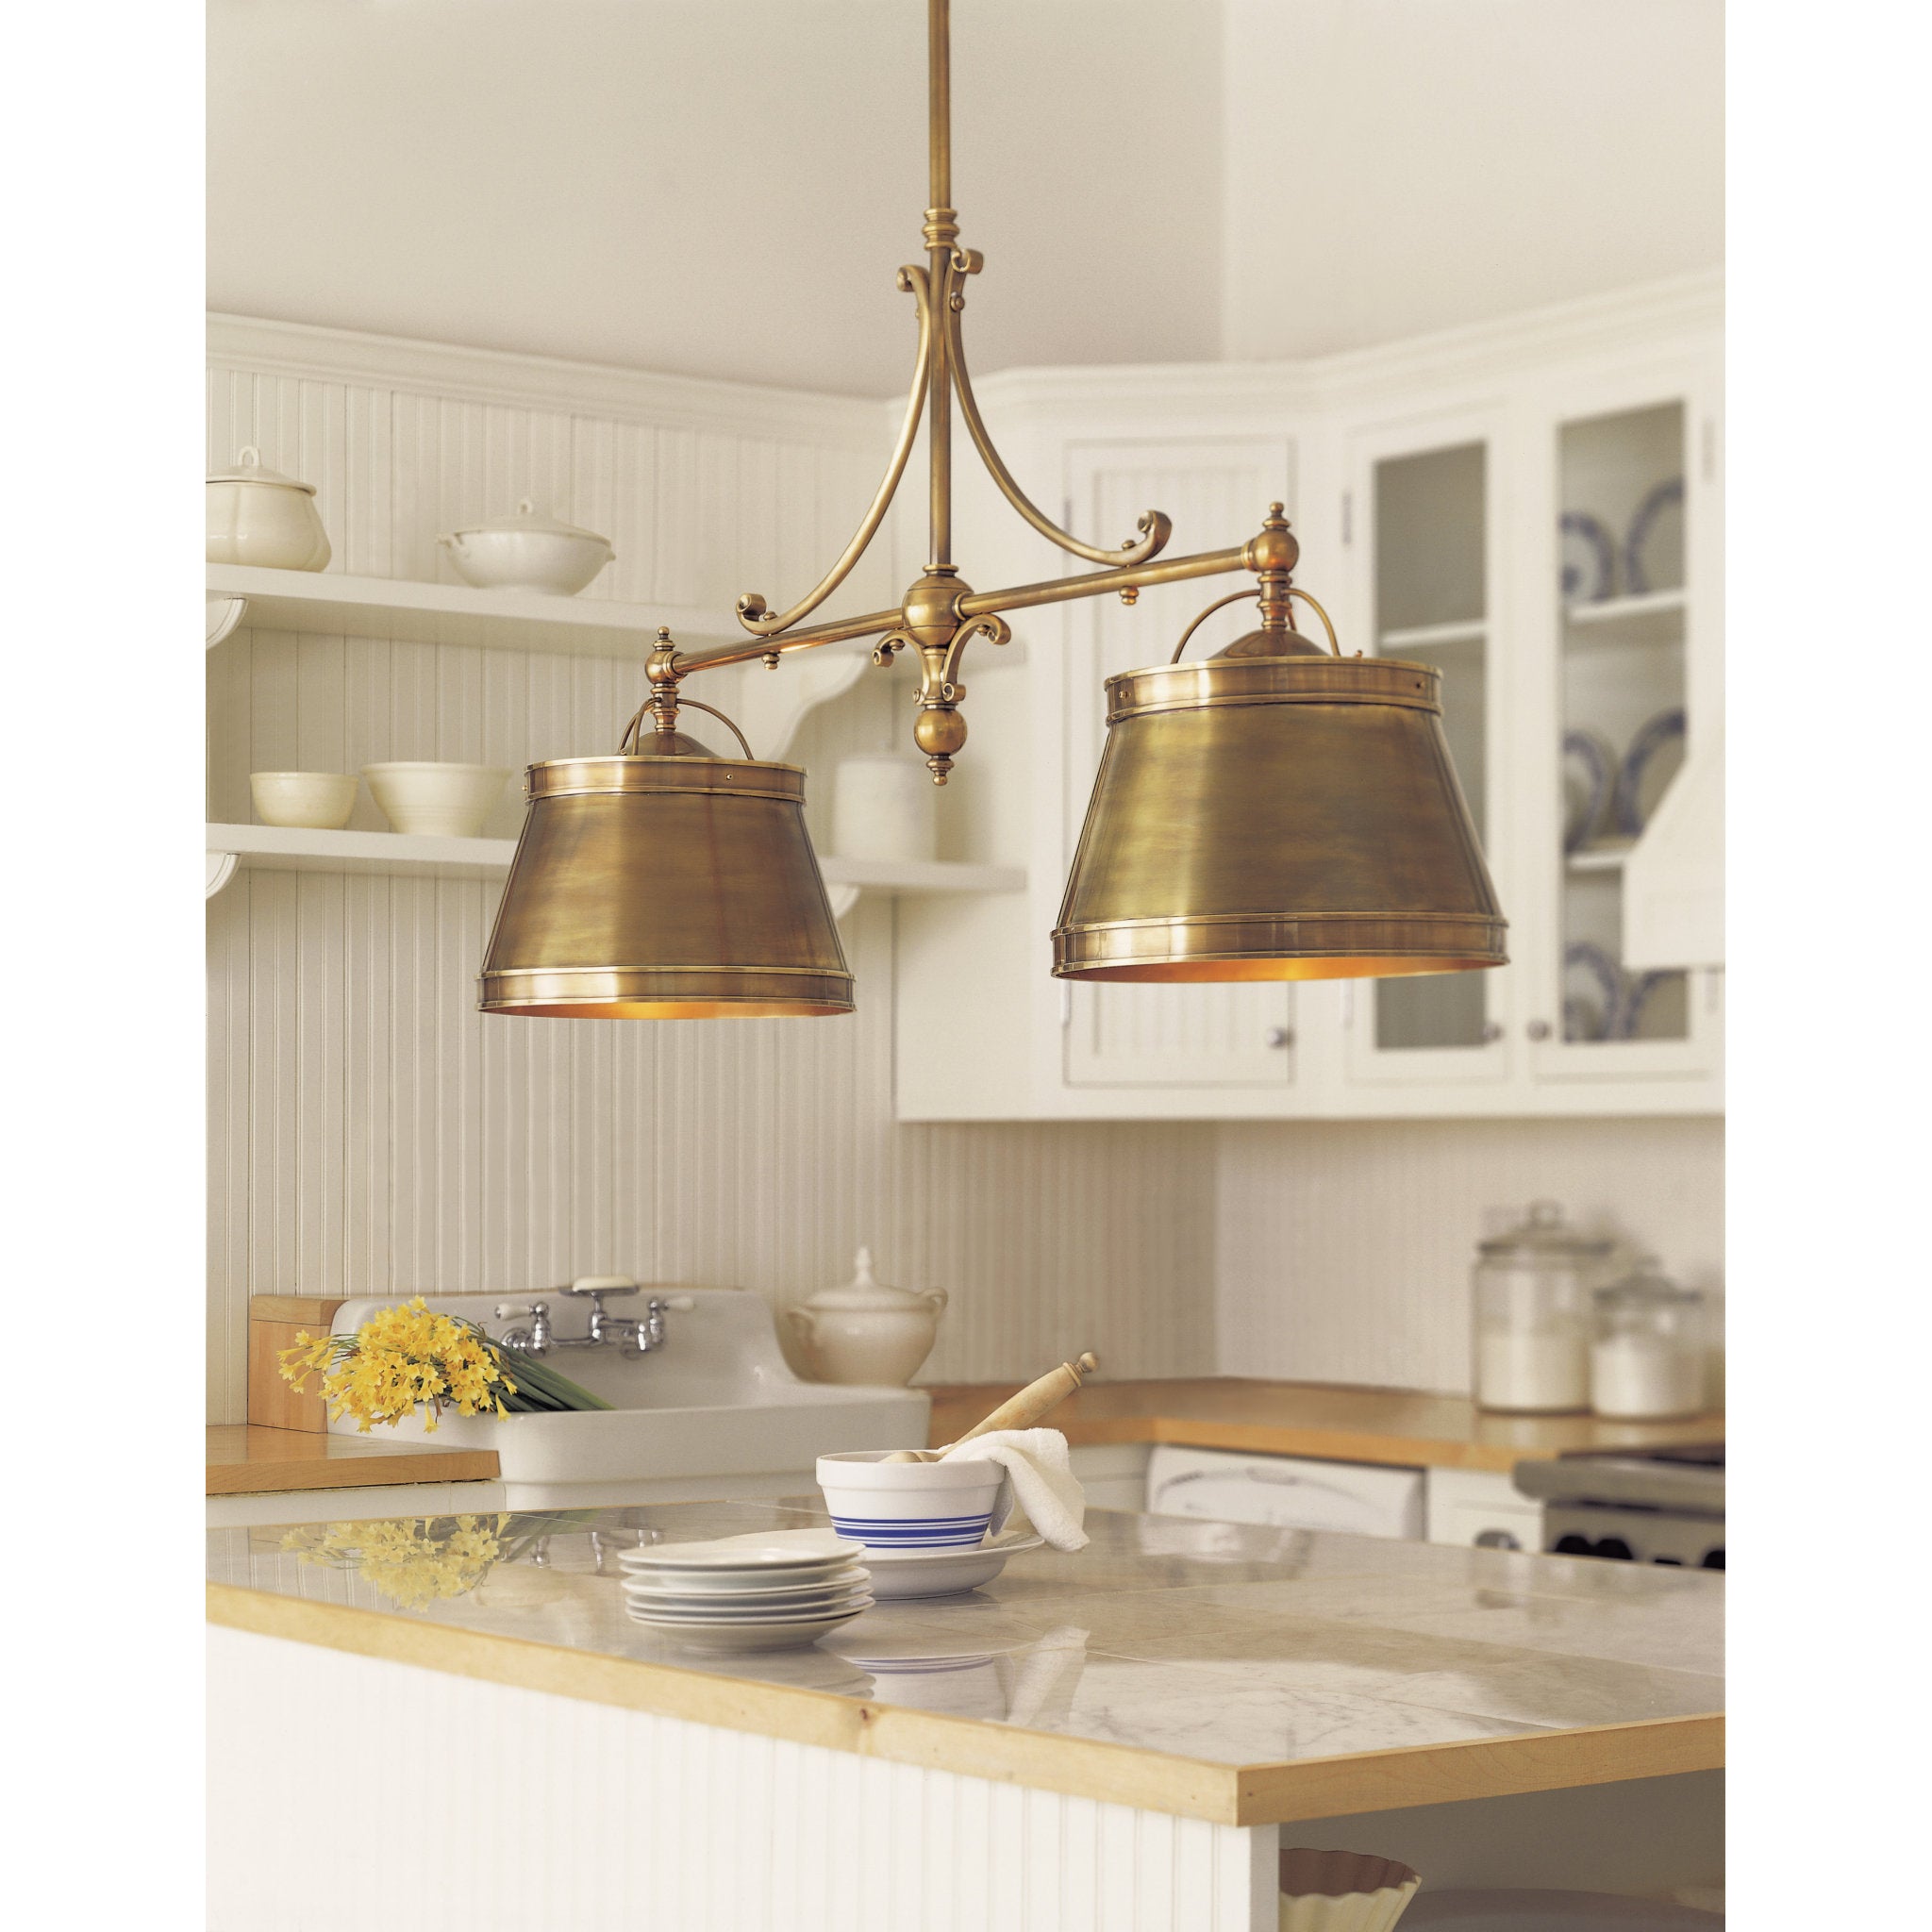 Chapman & Myers Sloane Double Shop Pendant in Antique-Burnished Brass